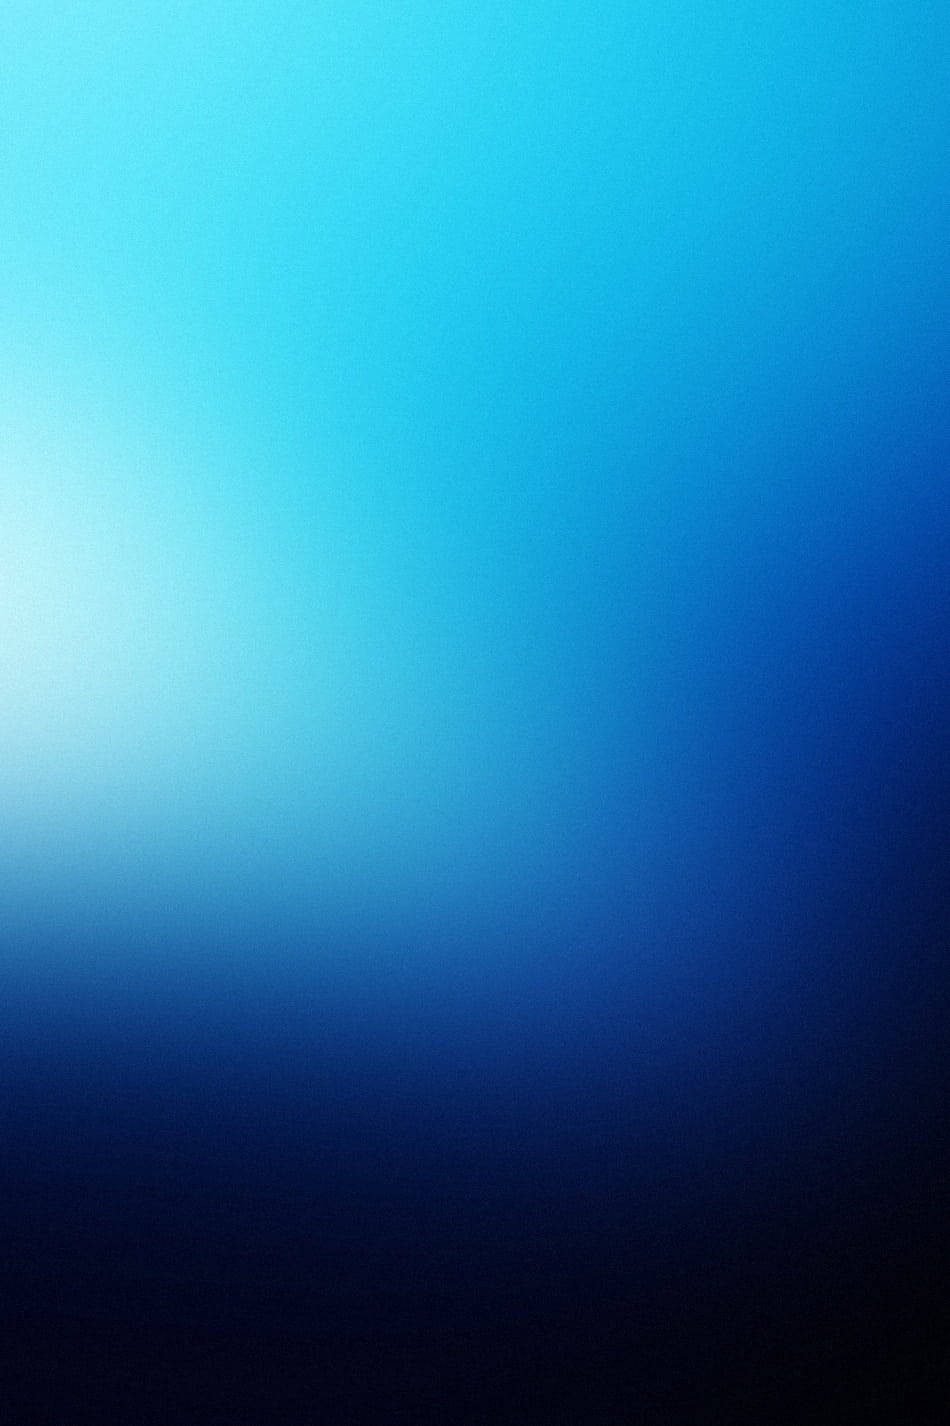 Download Black And Blue iPhone 4s Wallpaper | Wallpapers.com